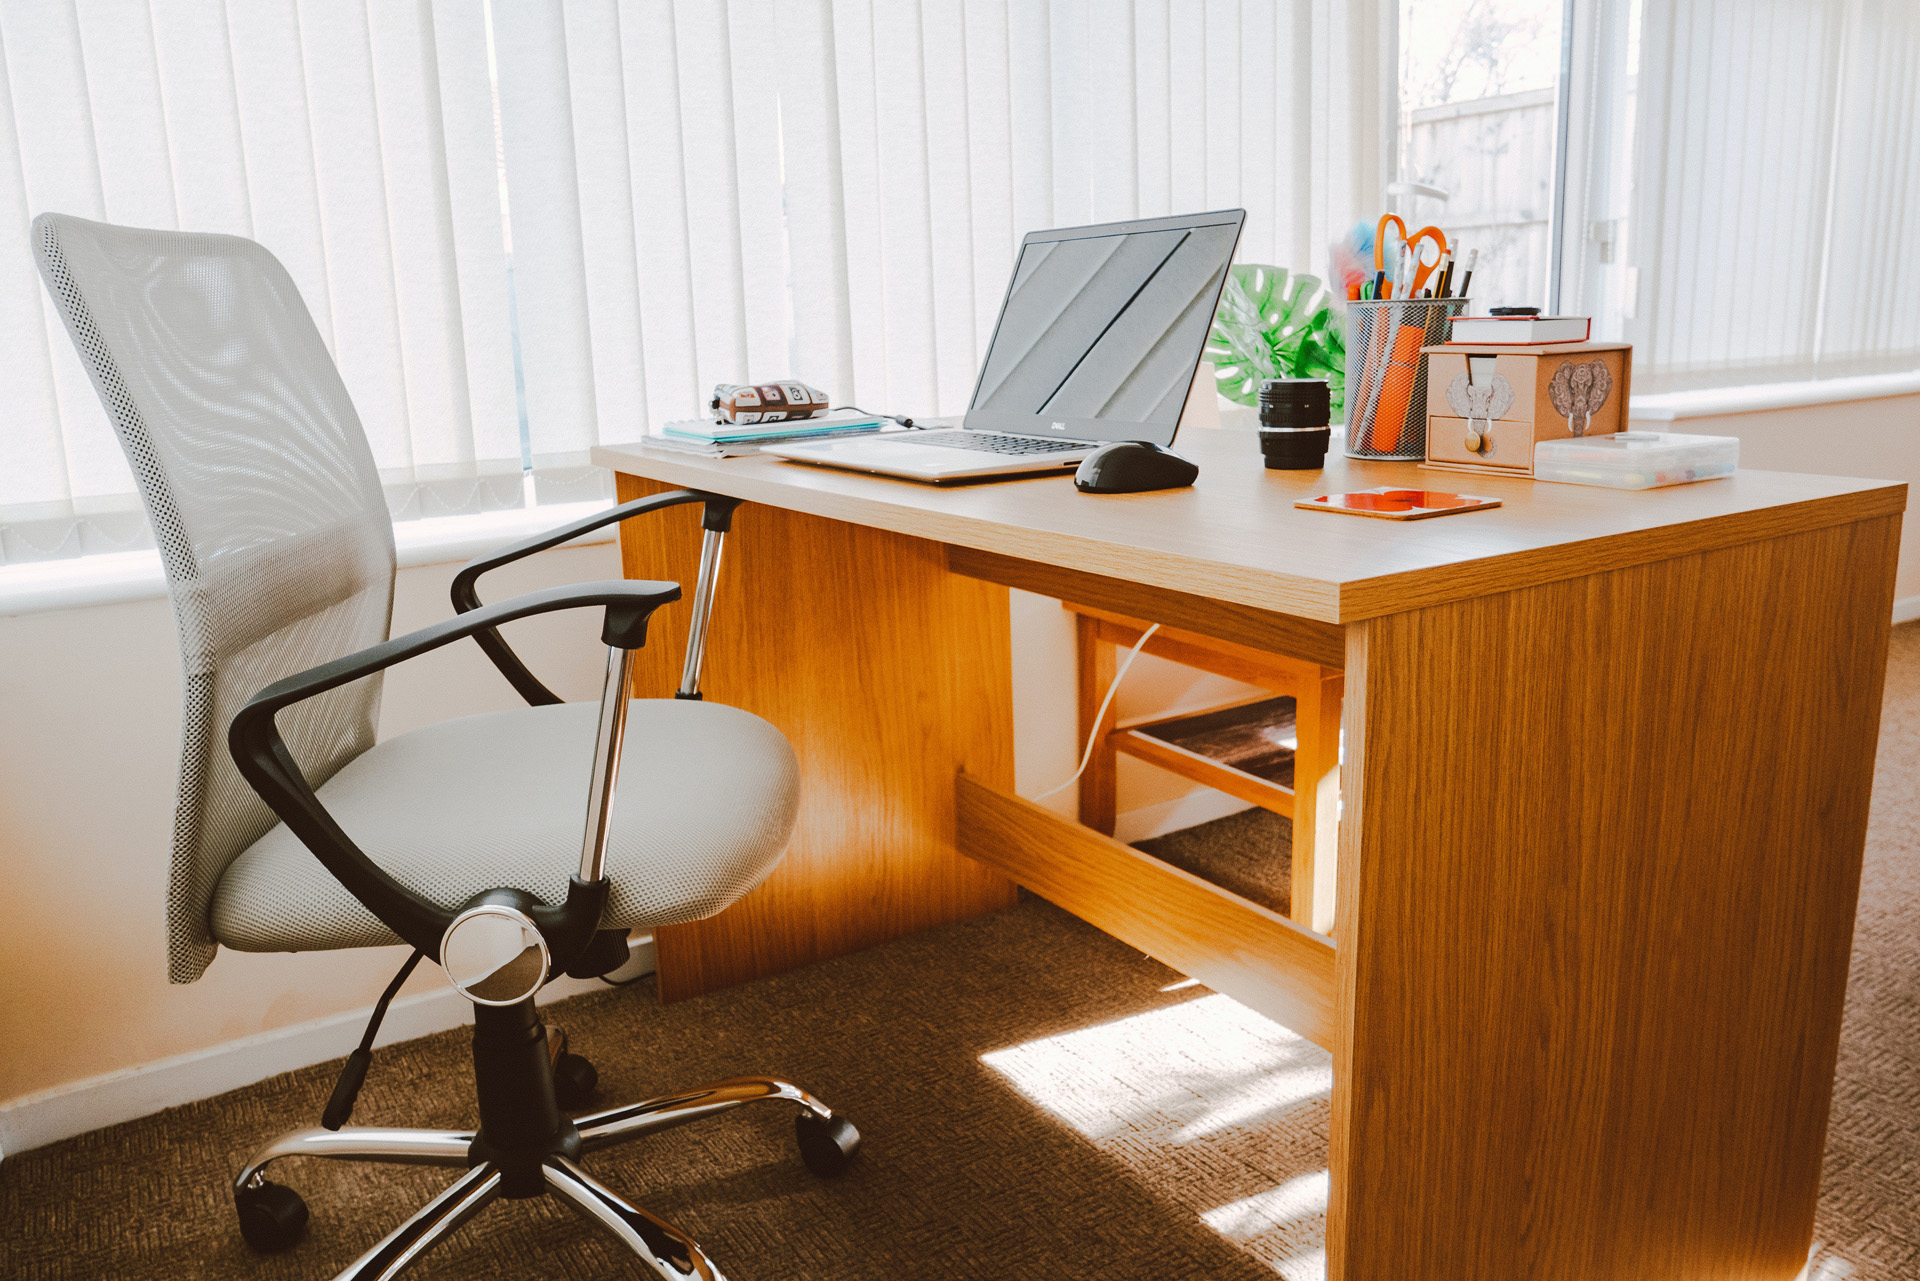 Rent office furniture as a business